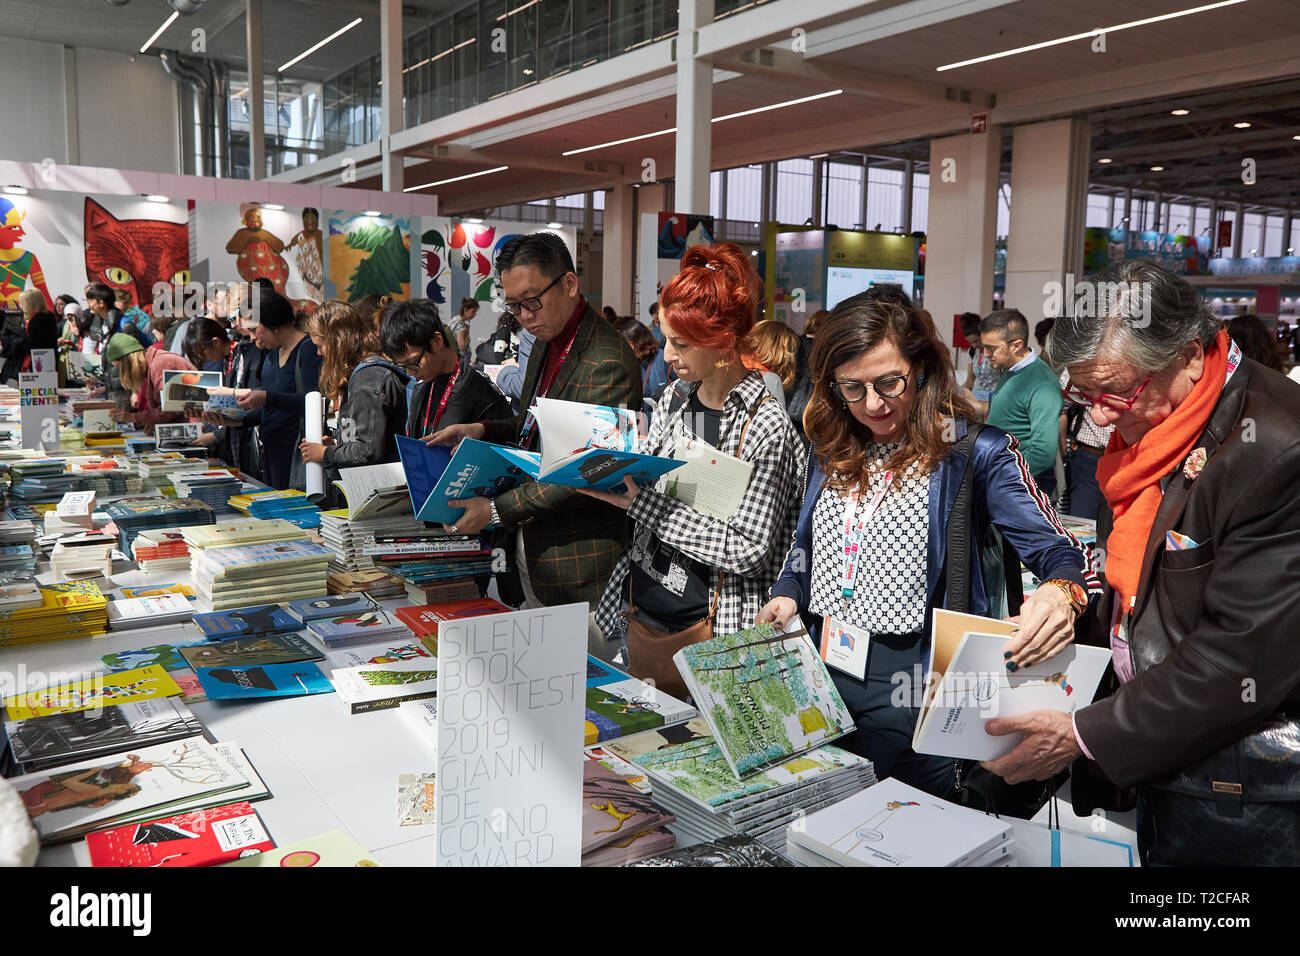 Bologna, ITALY. 1 April, 2019. Views from Bologna Children's Book Fair Opening Day at Fiera District in Bologna, Italy. Credit:  Massimiliano Donati/Awakening/Alamy Live News Stock Photo